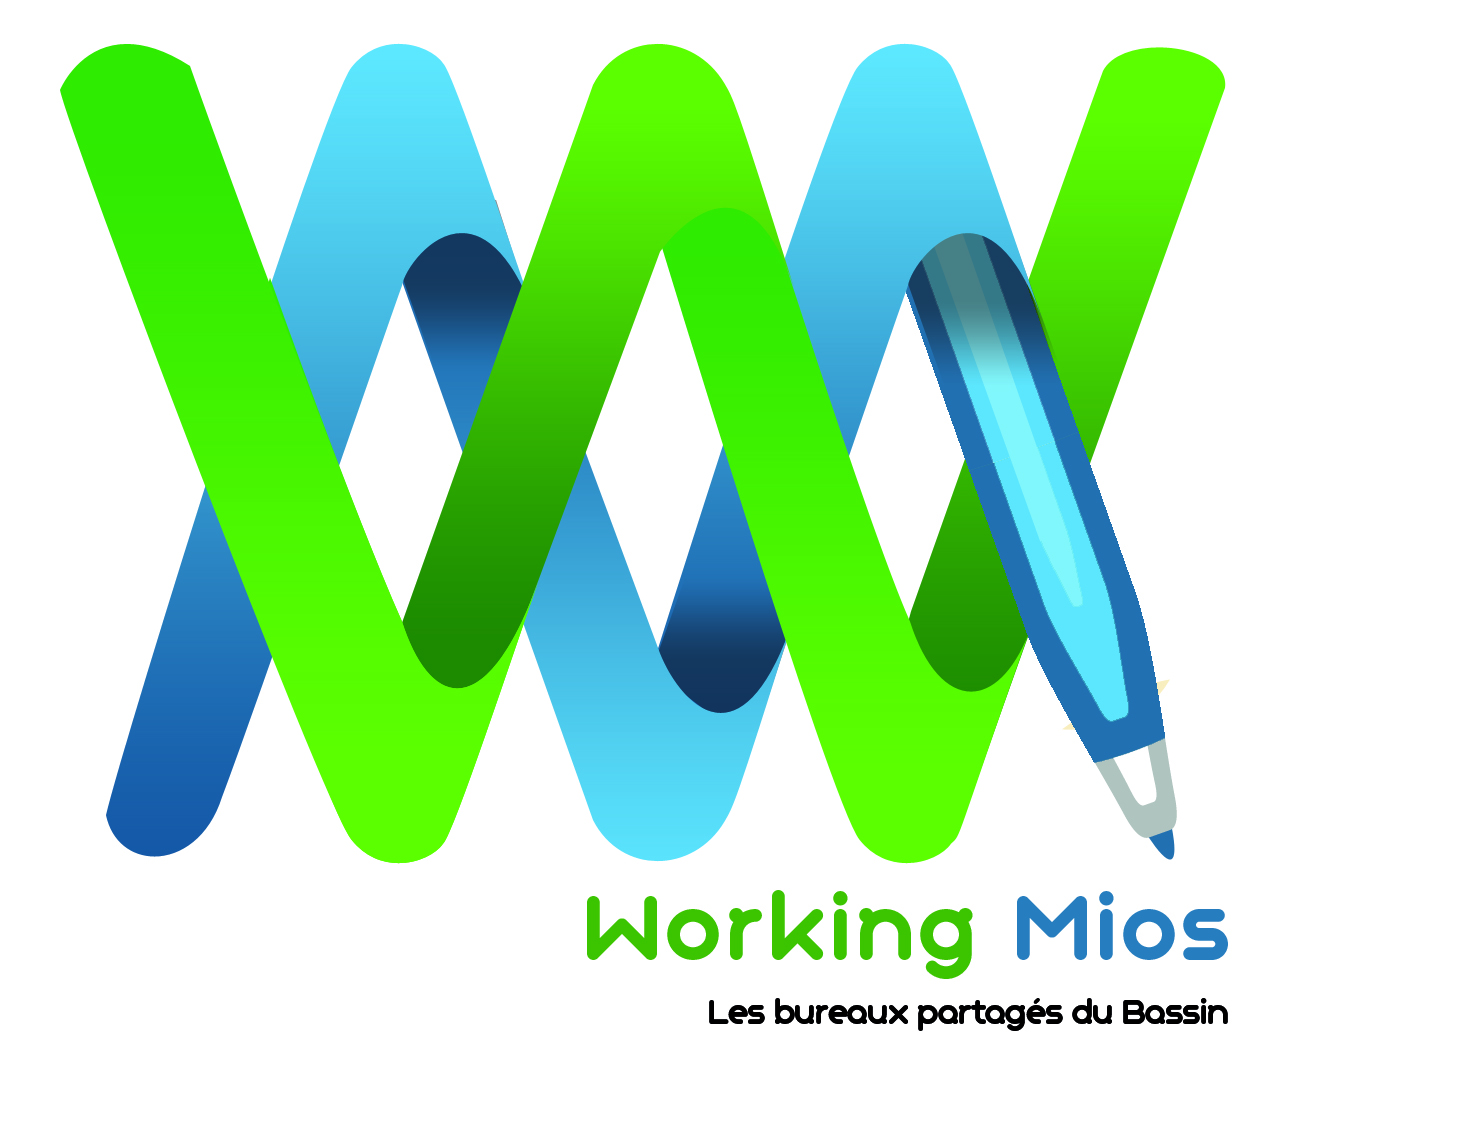 WORKING MIOS